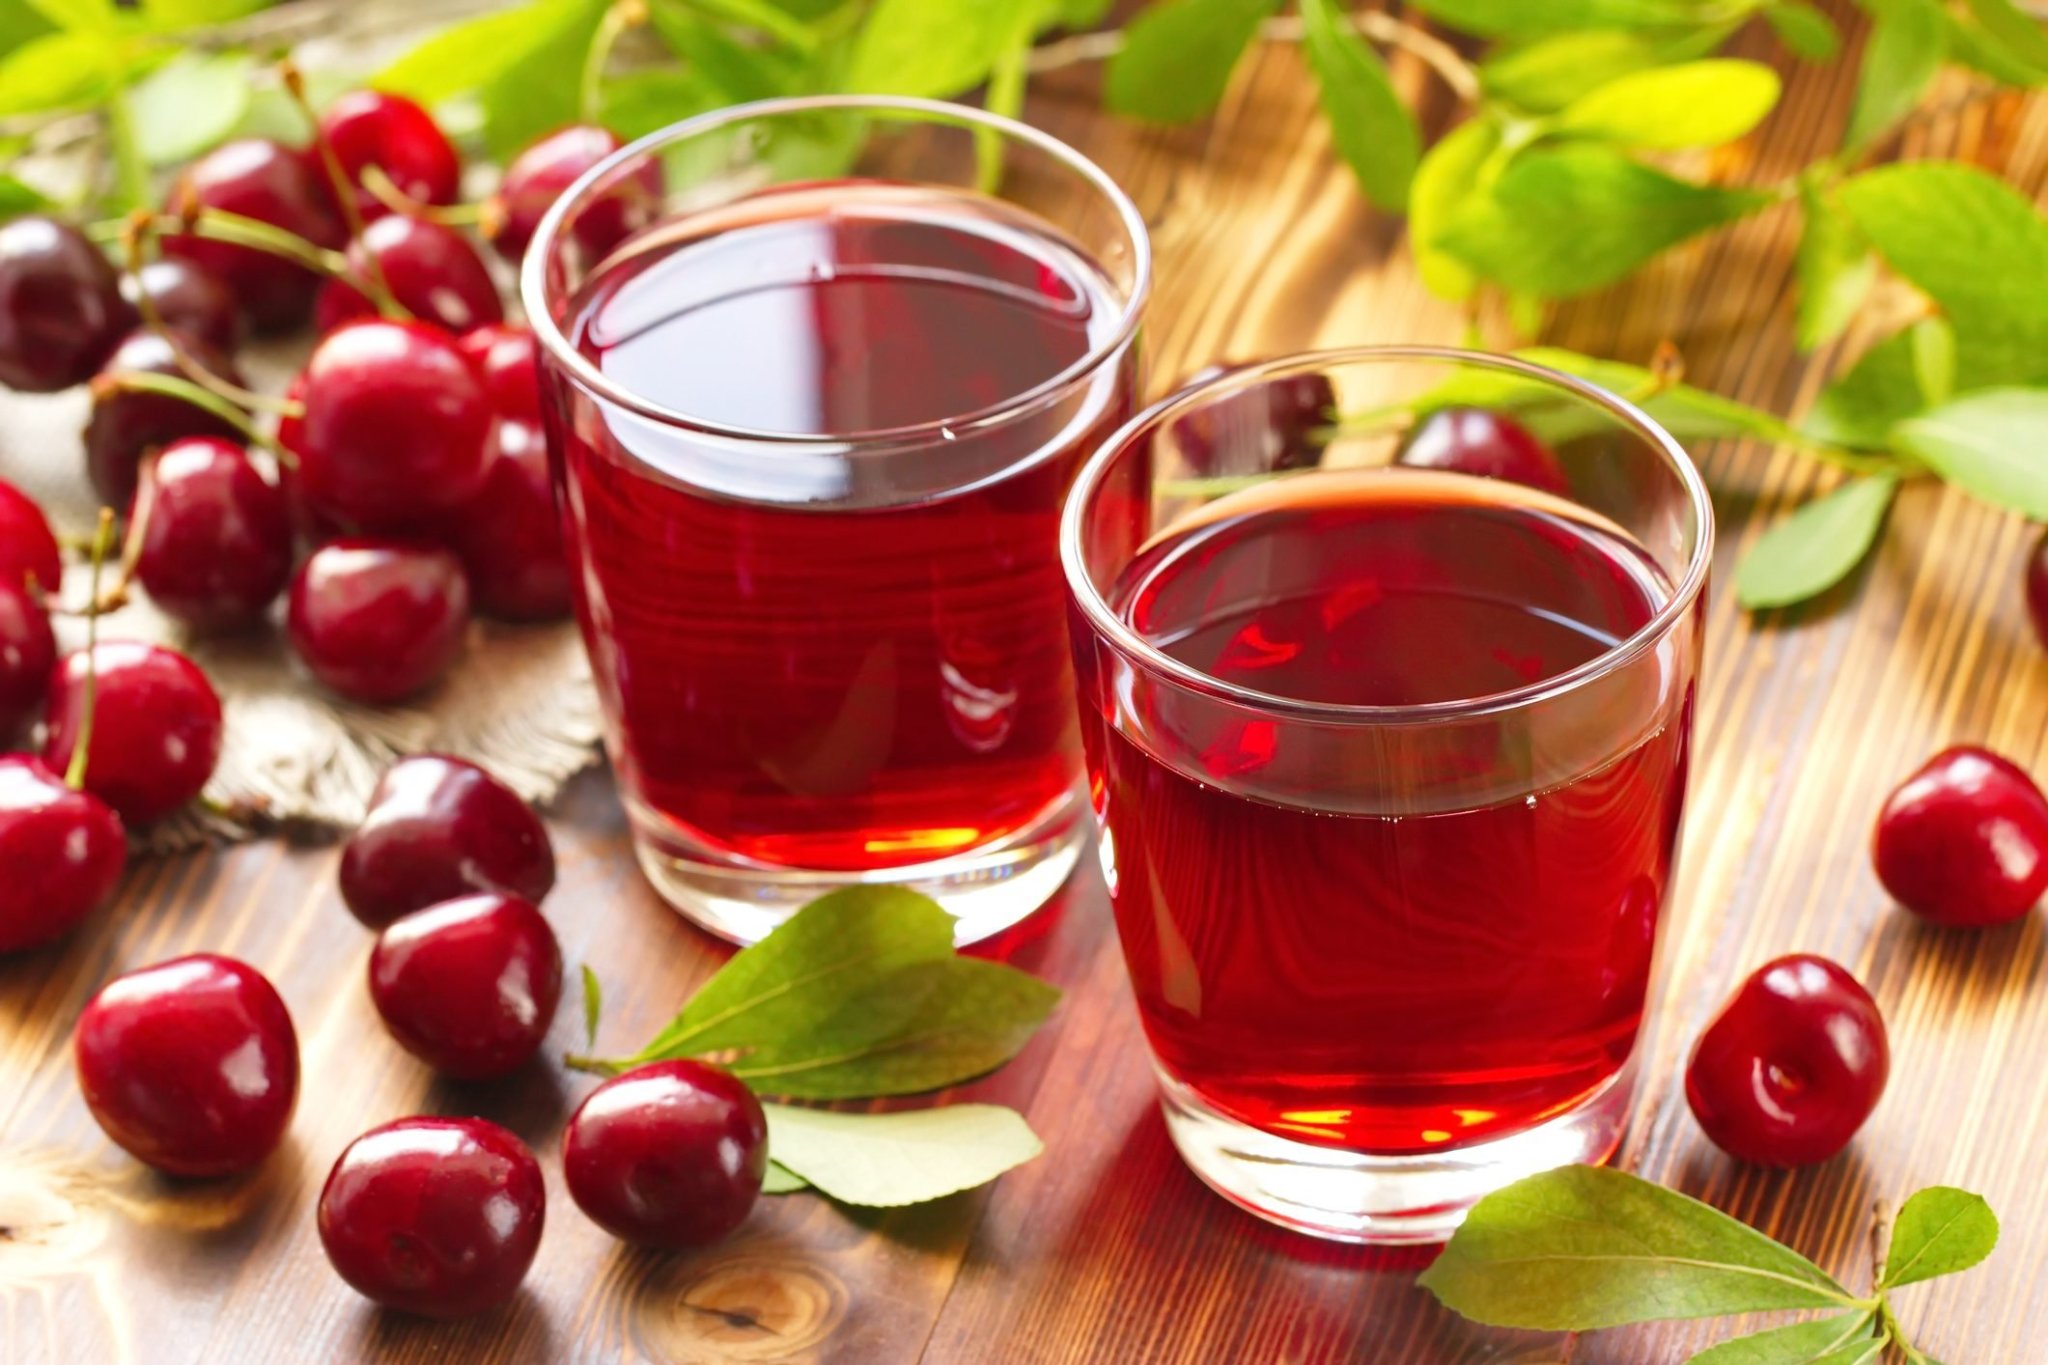 Tart Cherry Juice for Insomnia Is the Internet’s Latest Viral Trend—But Does It Work?